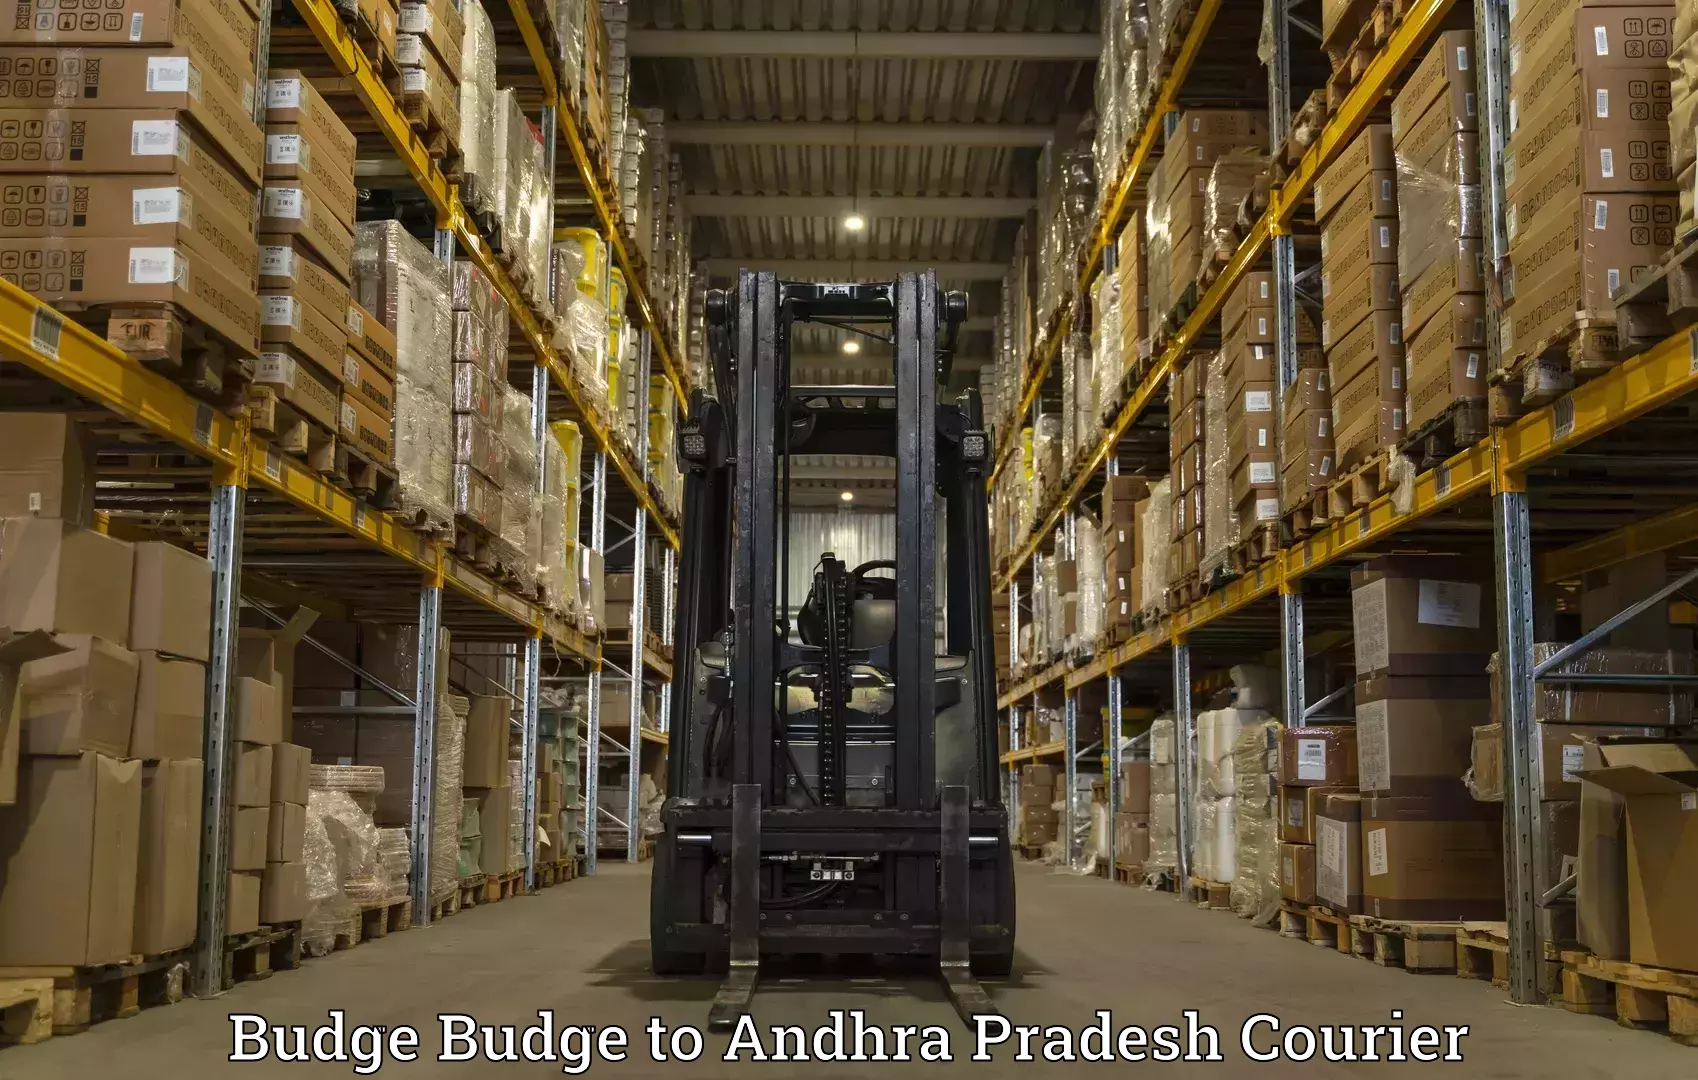 Parcel service for businesses in Budge Budge to Visakhapatnam Port